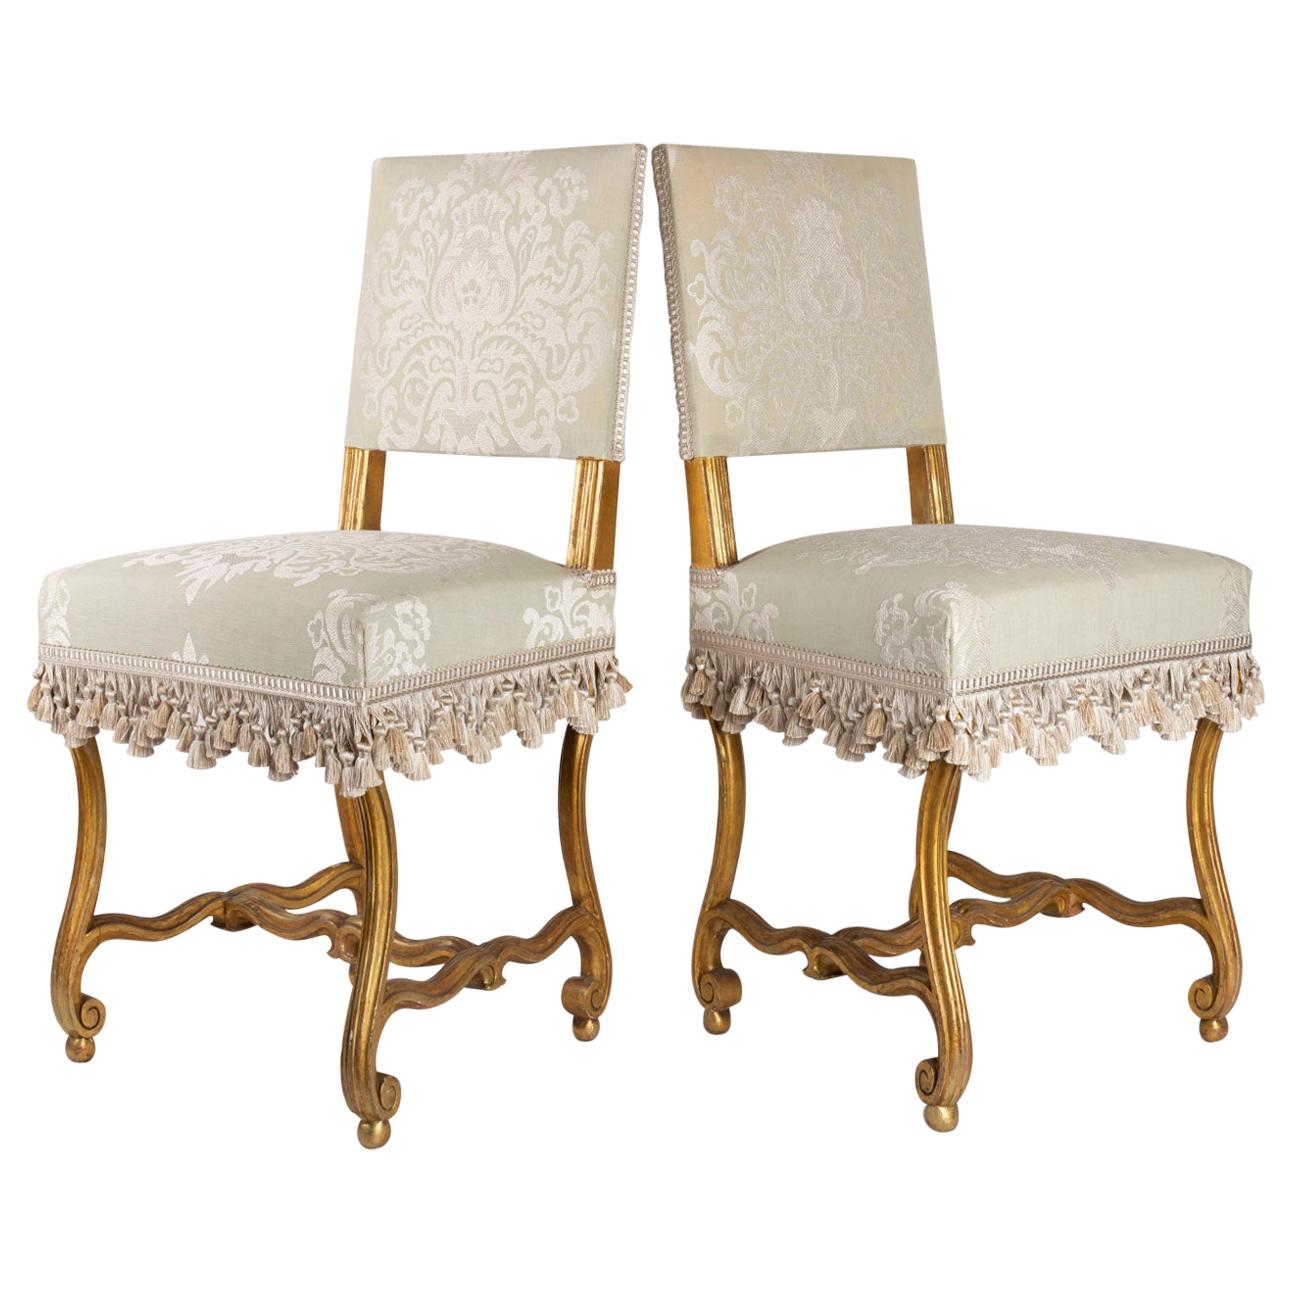 Pair of Chairs, Sheep Bones, Carved and Gilded Wooden, Napoleon III Period